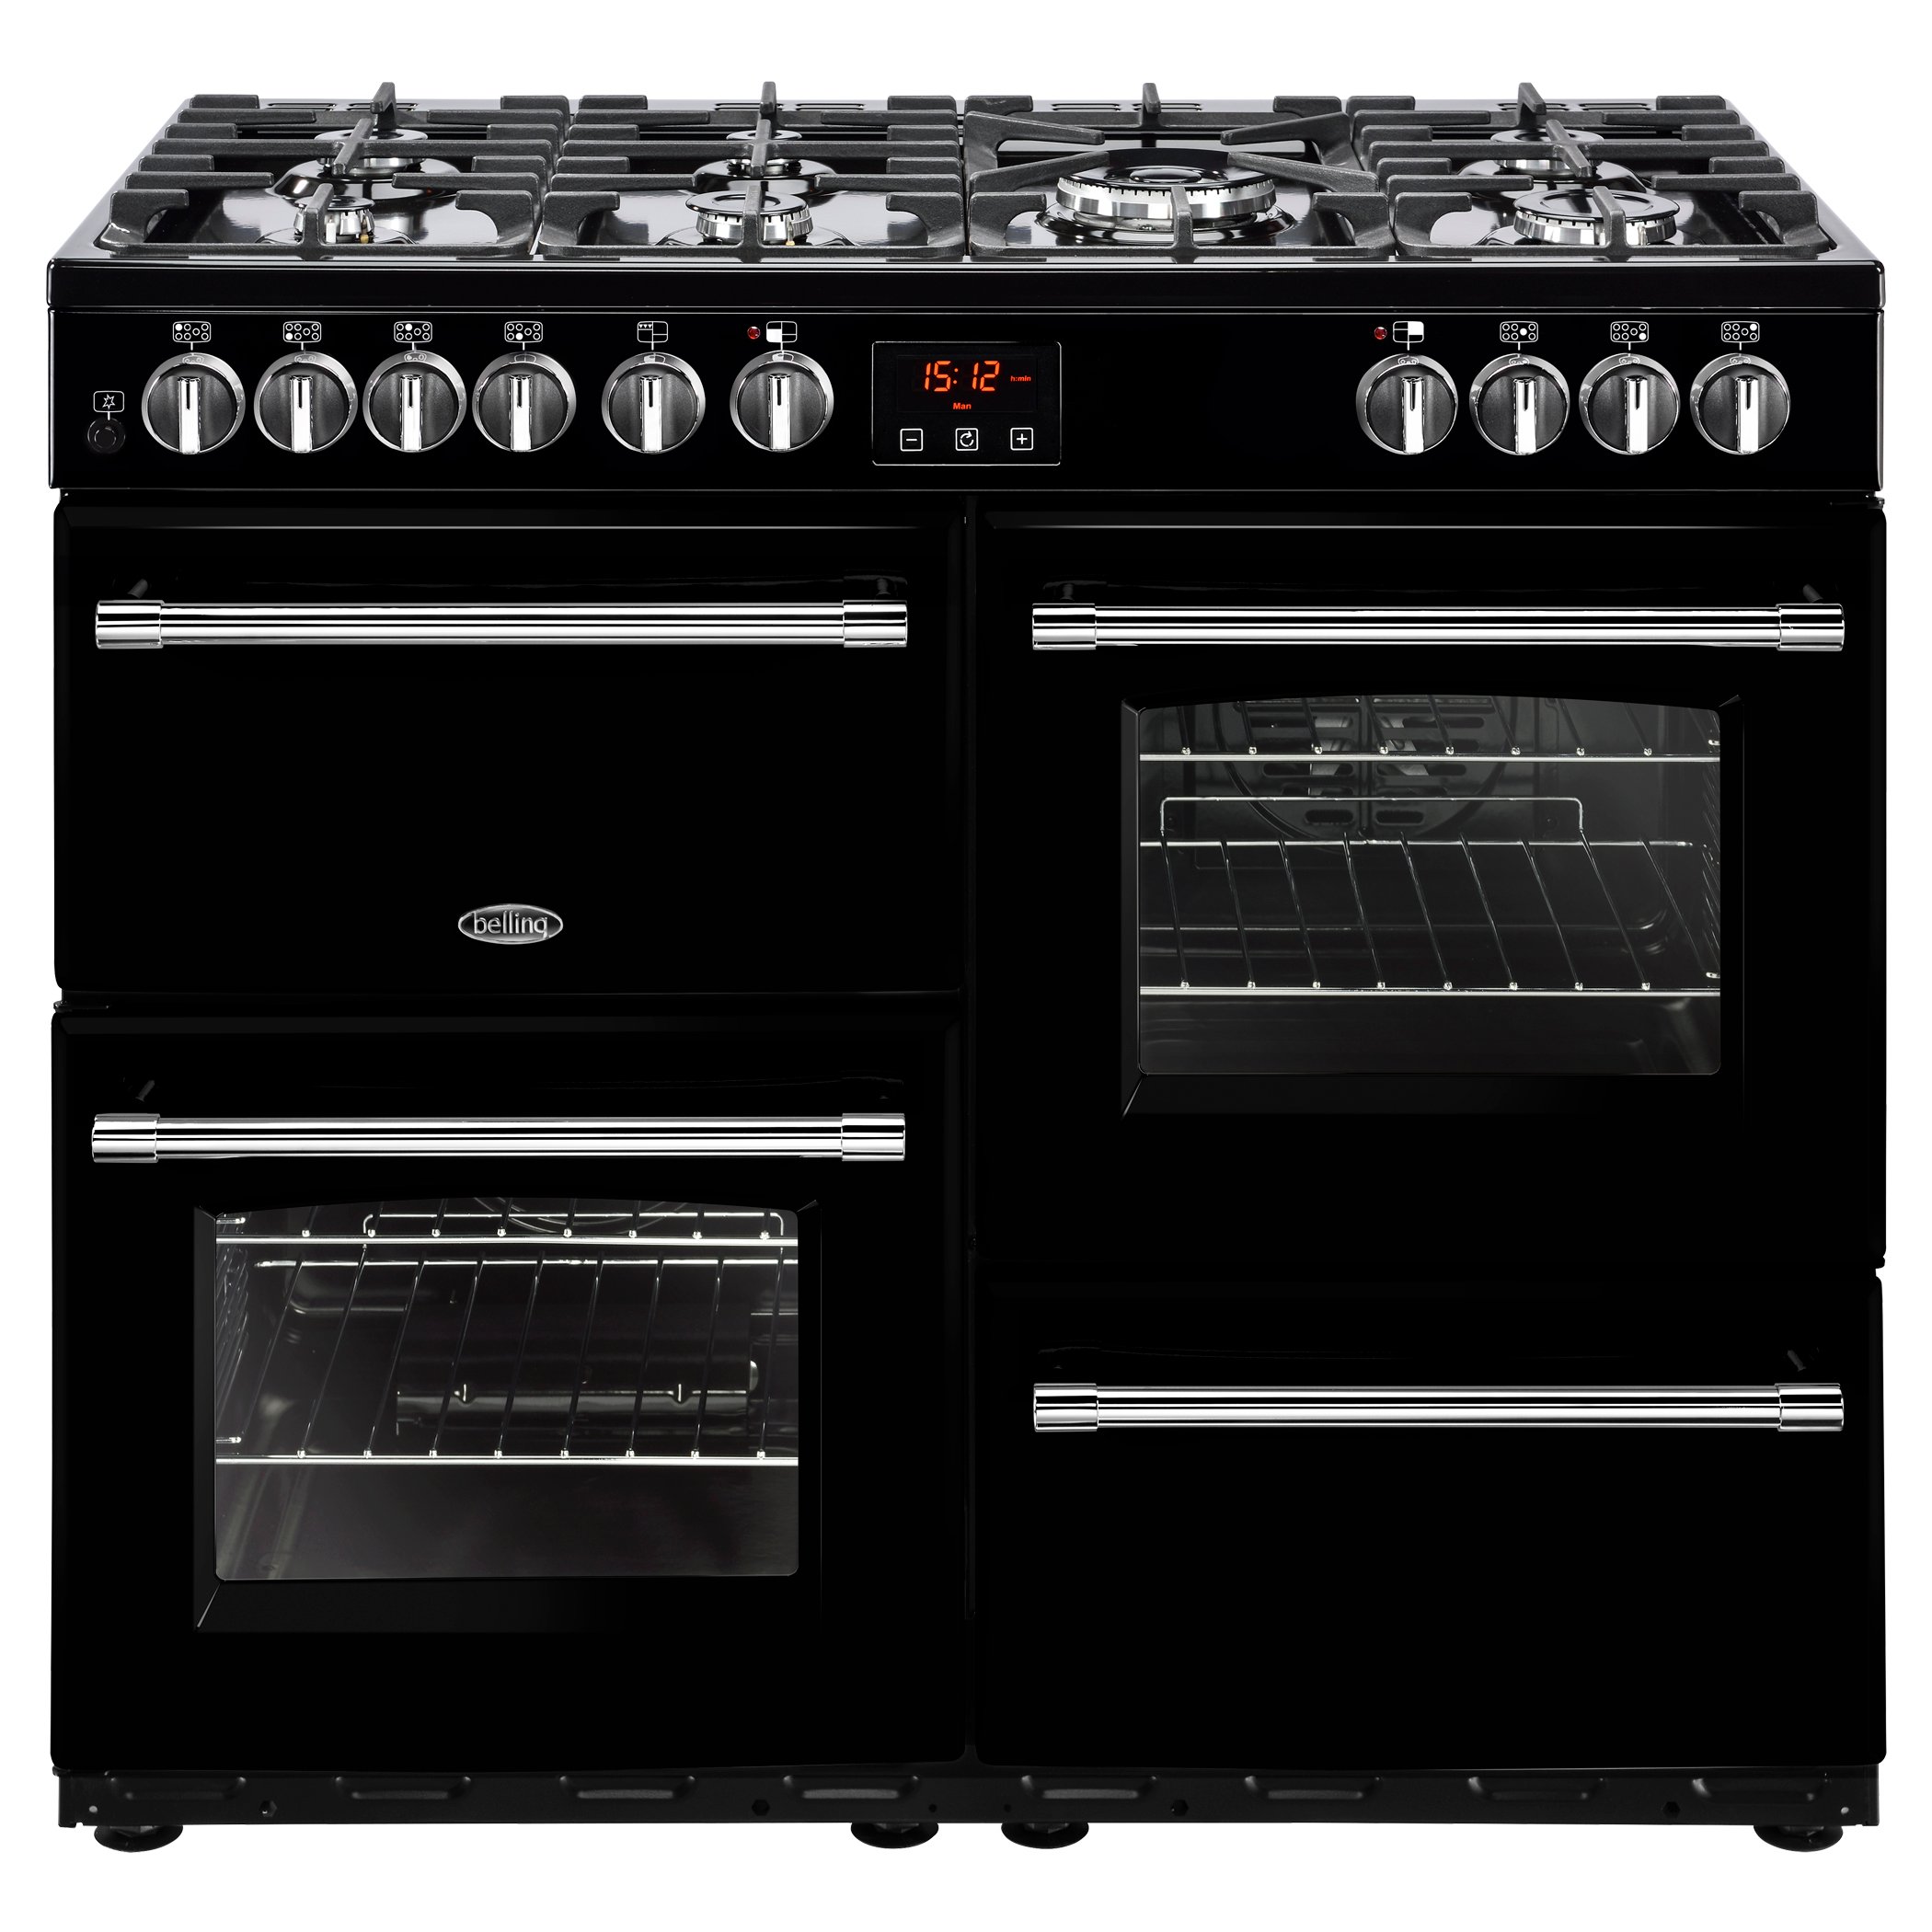 100cm dual fuel range cooker with 7 burner gas hob, 4kW PowerWok, Maxi-Clock, variable electric grill and easy clean enamel.